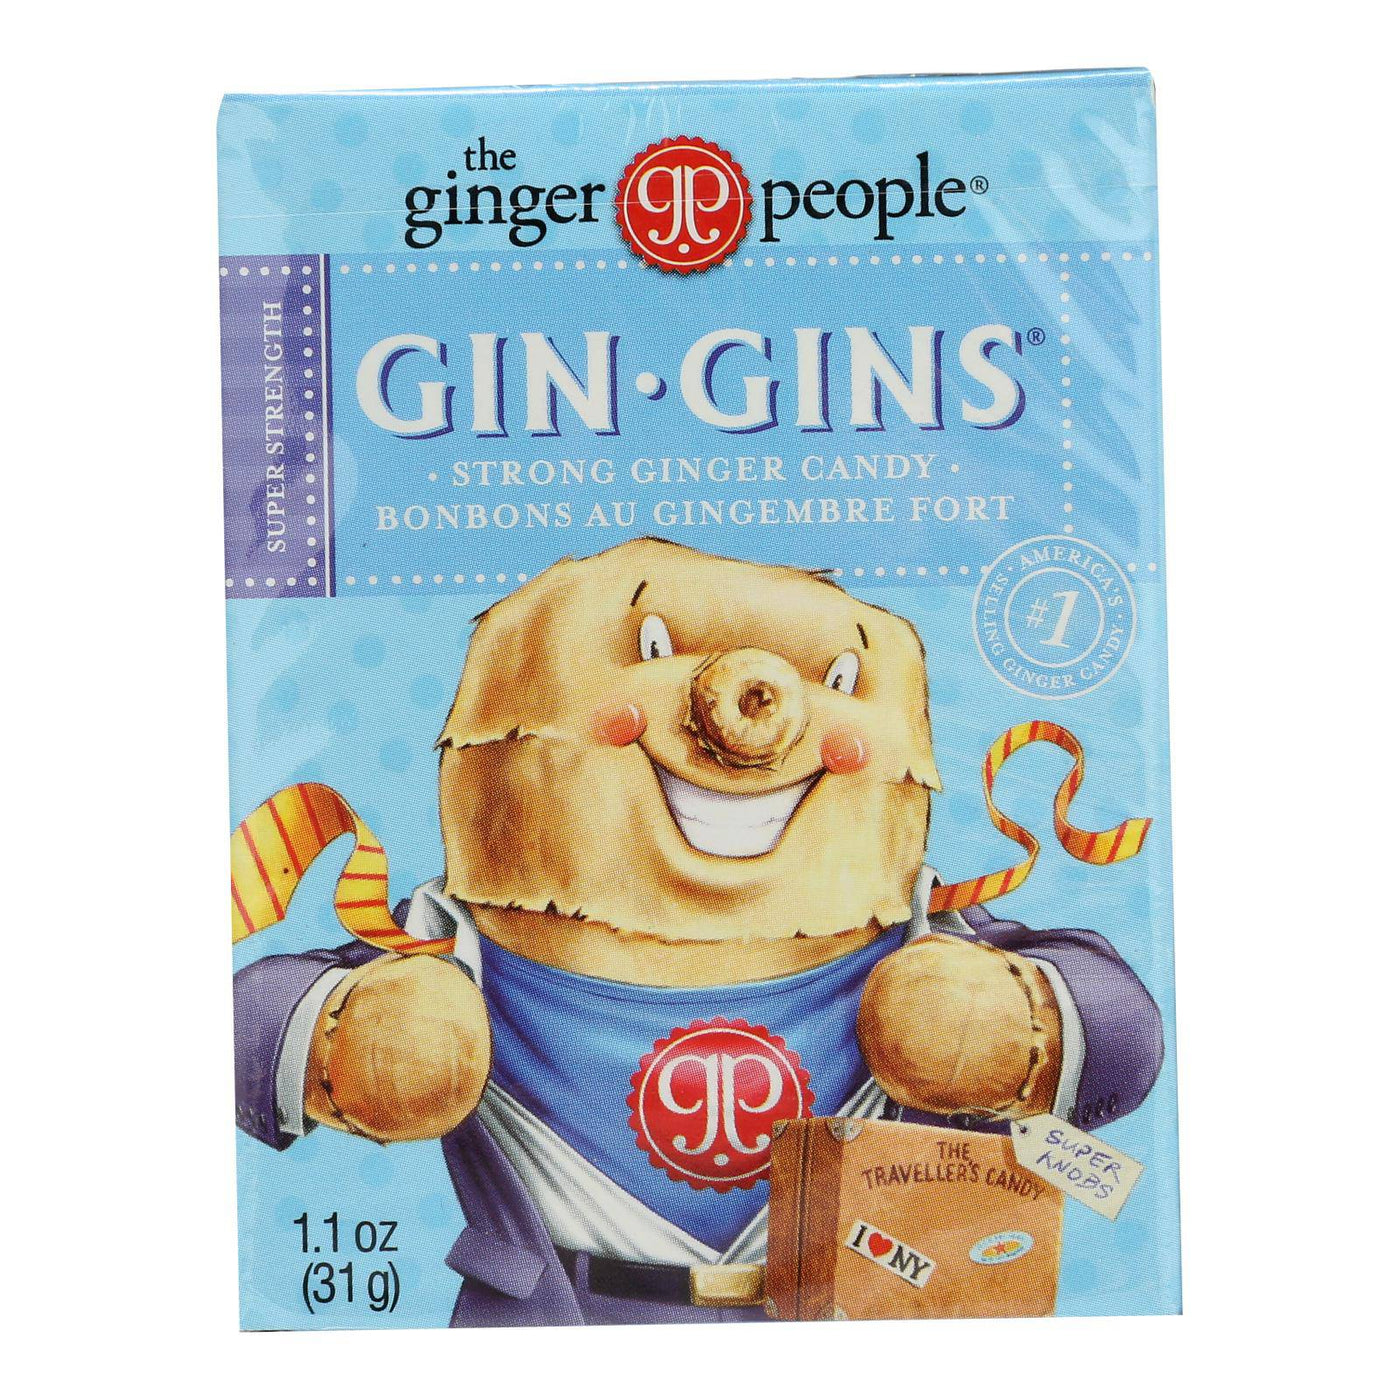 Ginger People Gingins Super Boost Candy - Case Of 24 - 1.1 Oz | OnlyNaturals.us